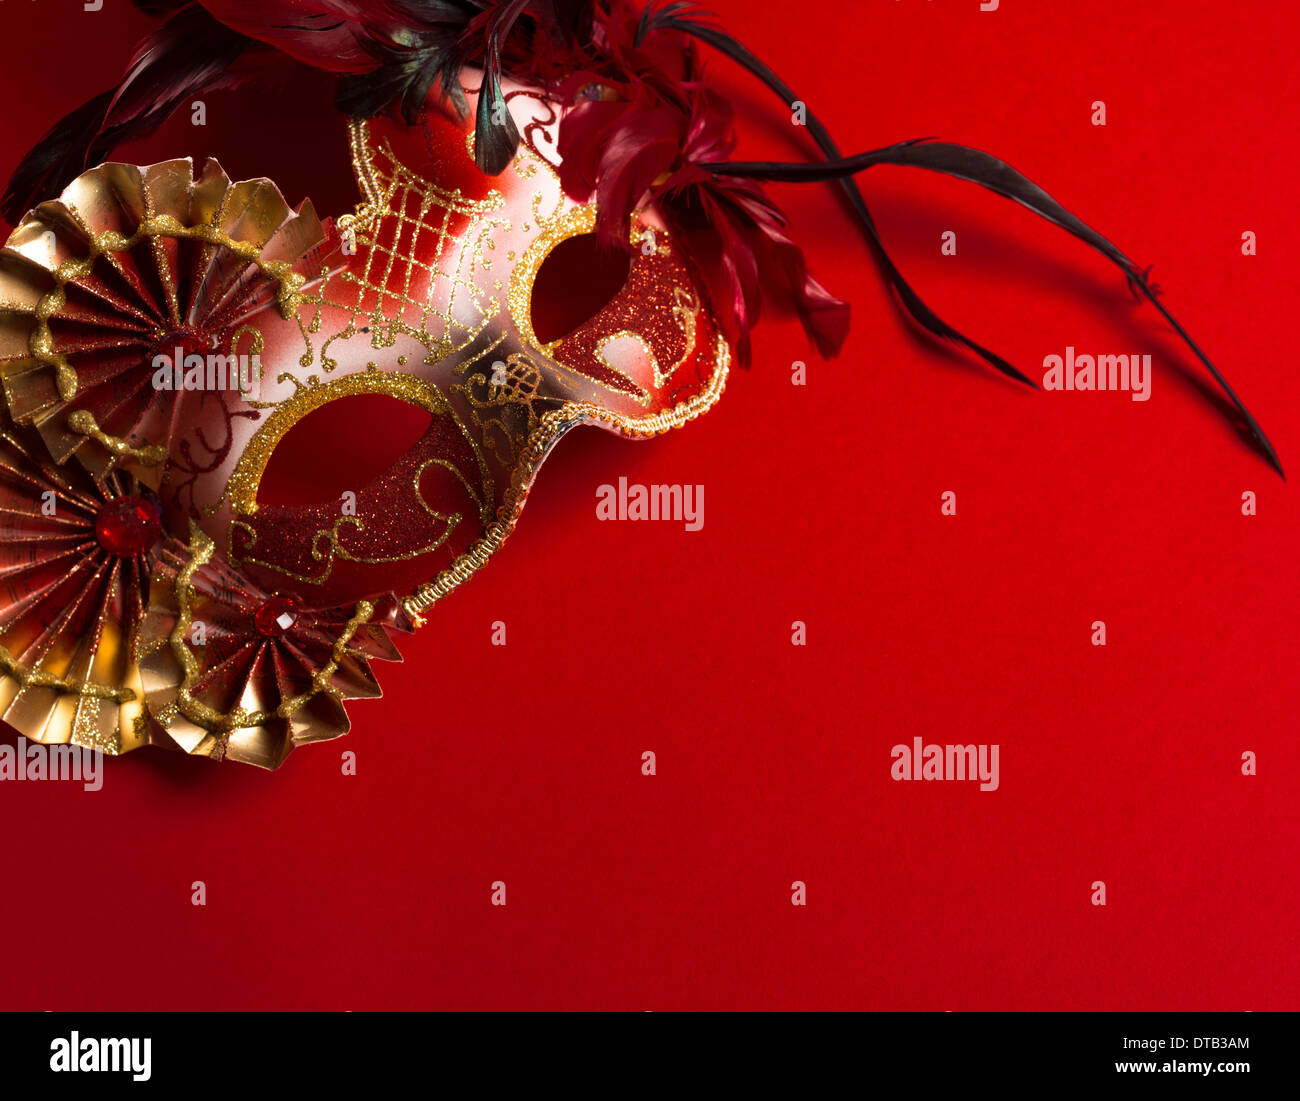 A red and gold venetian, mardi gras mask on a red background Stock Photo